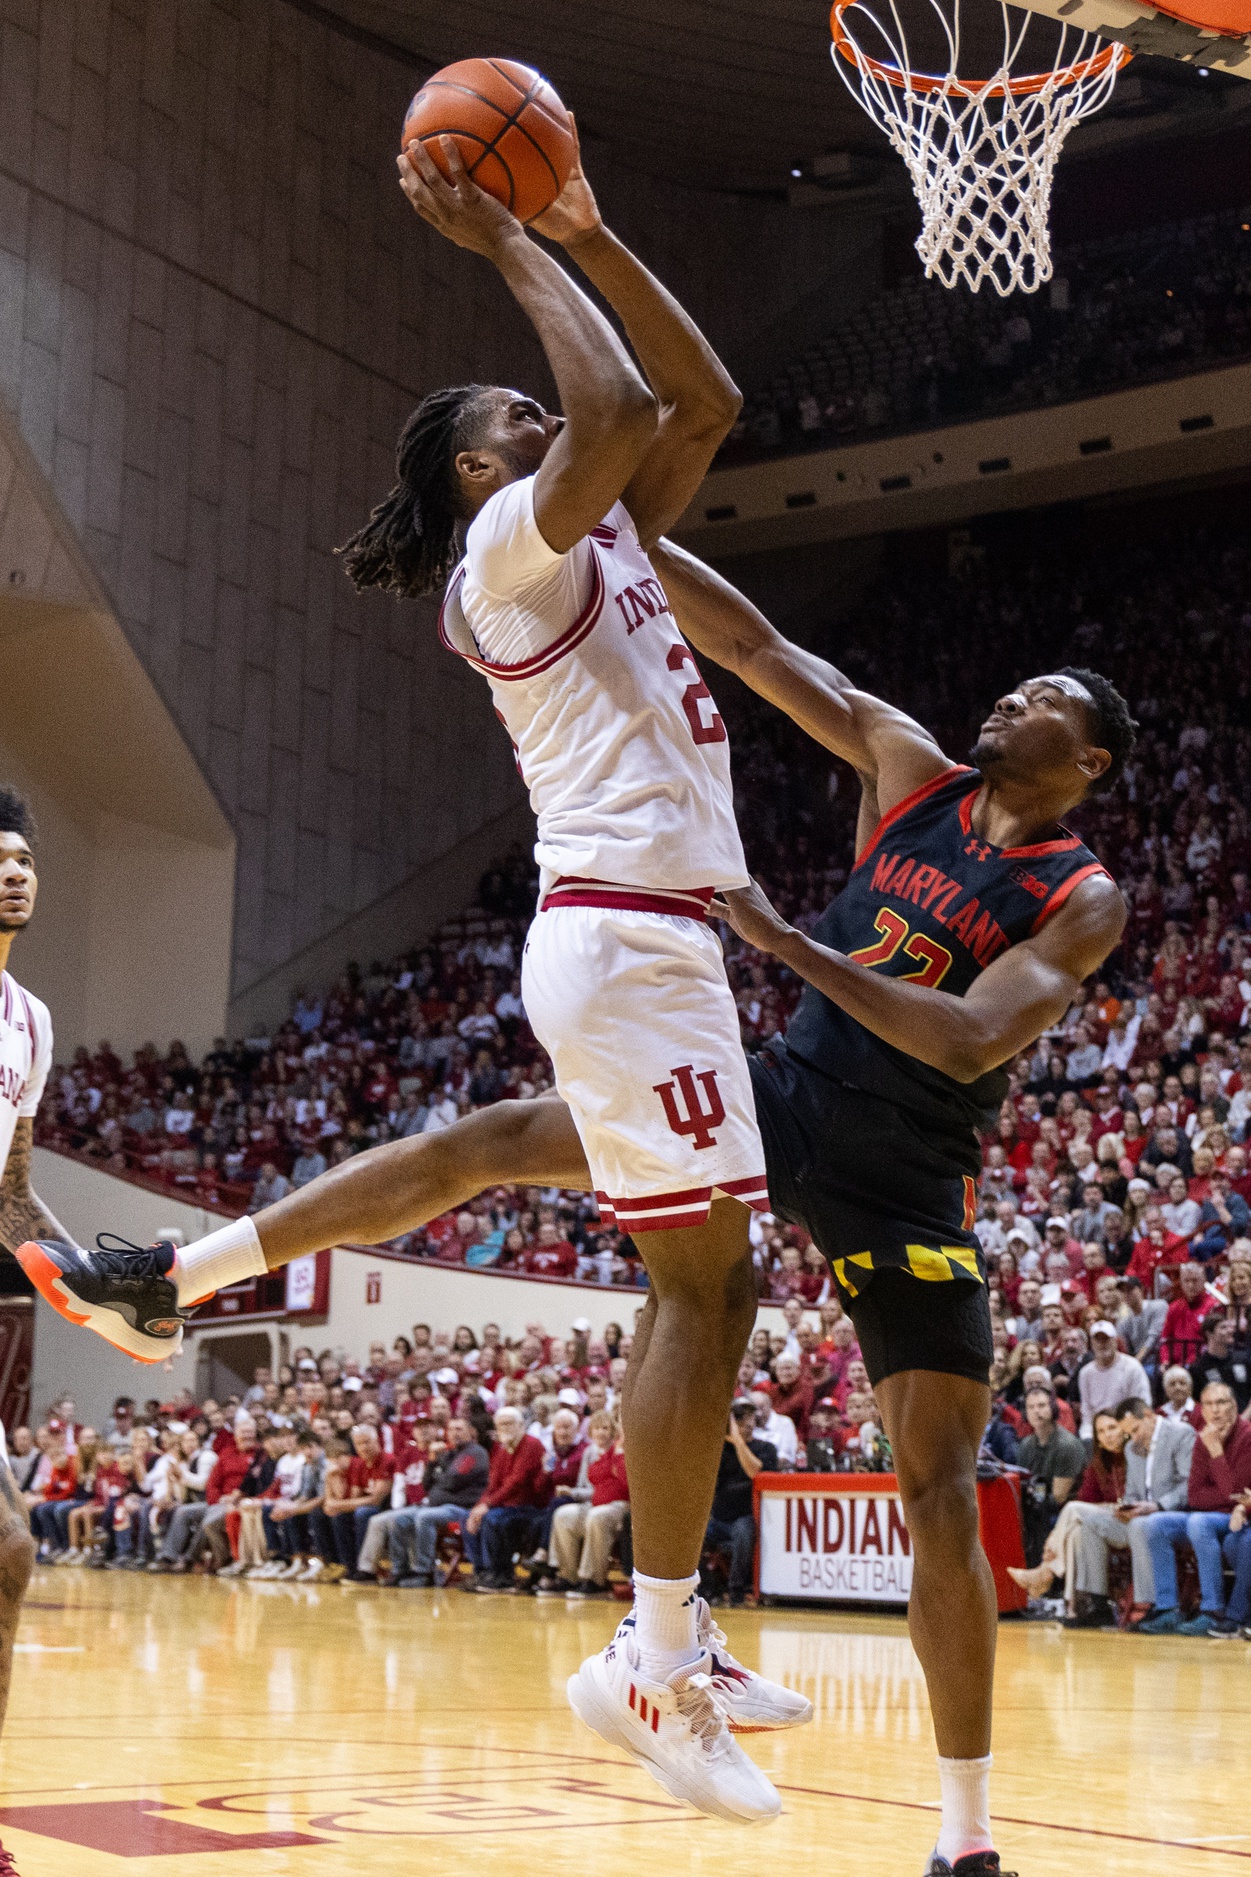 Indiana University's Trey Galloway (32) passes inside to Mackenzie Mgbako (21) during the first half of the Indiana versus Maryland men's basketball game at Simon Skjodt Assembly Hall.  